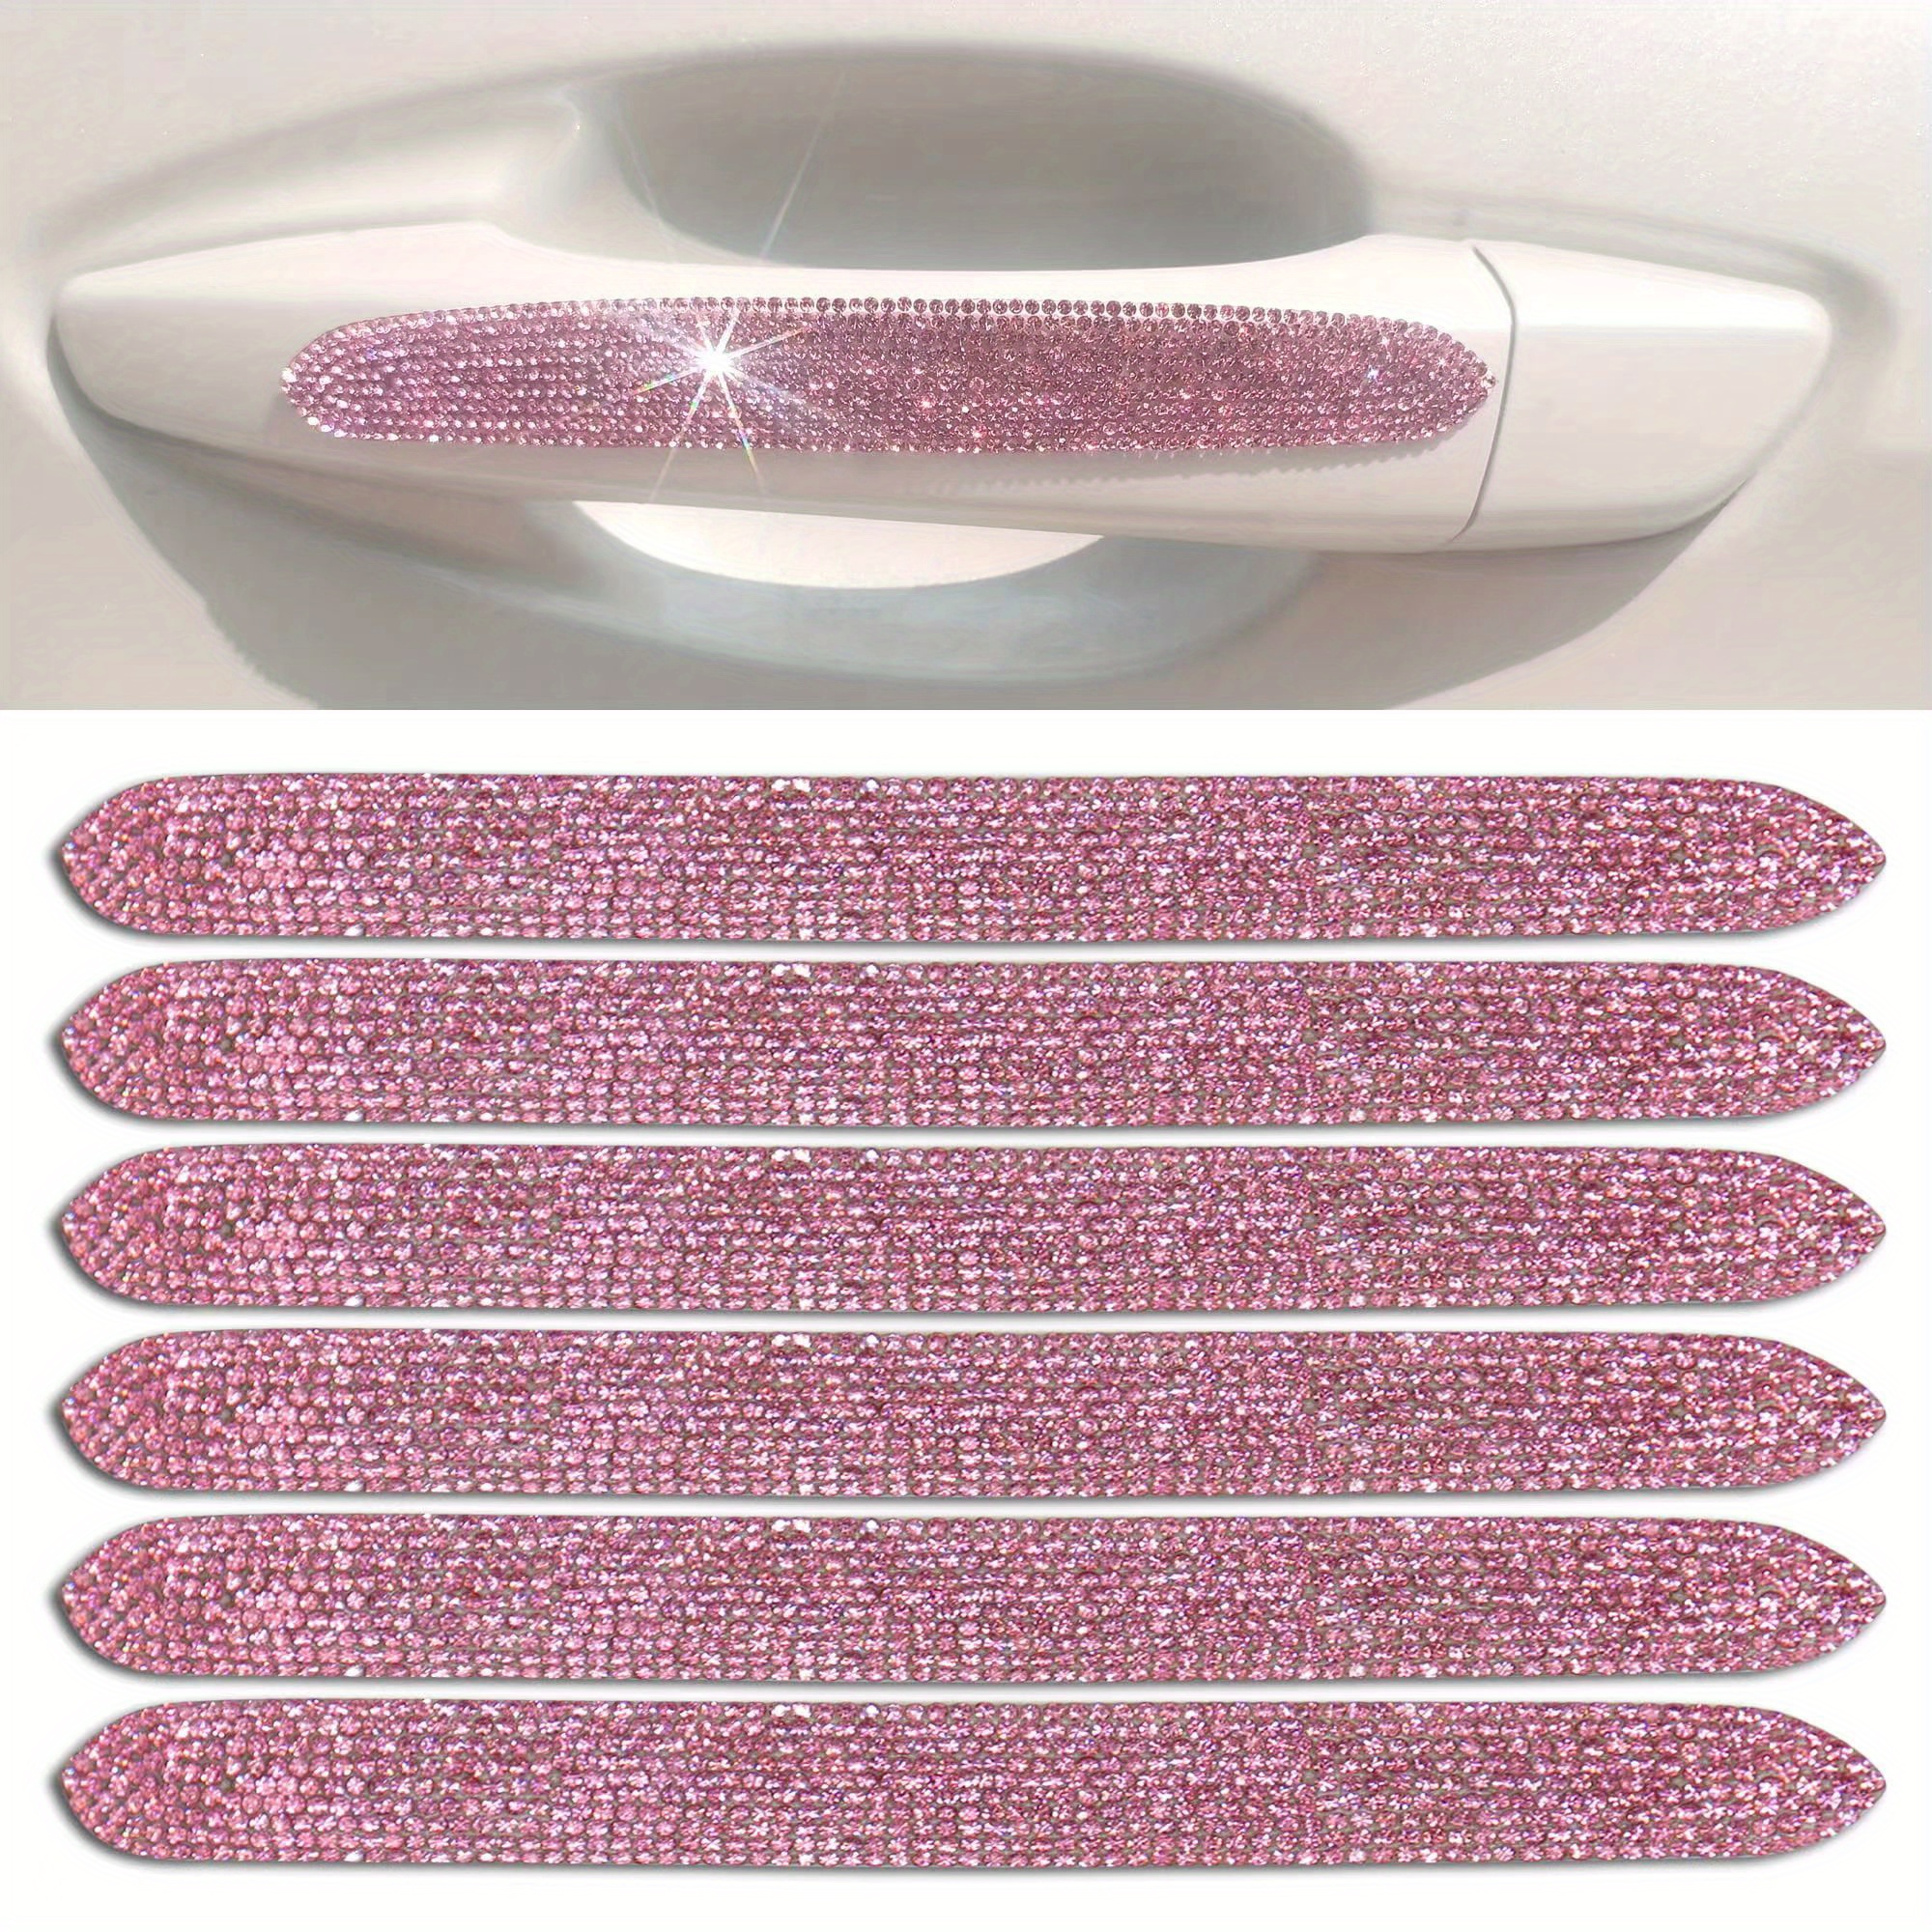 Upgrade Your Car with 6pcs Bling Big Size Exterior Door Handle Protectors -  Shiny Crystal Stickers for Women & Girls!